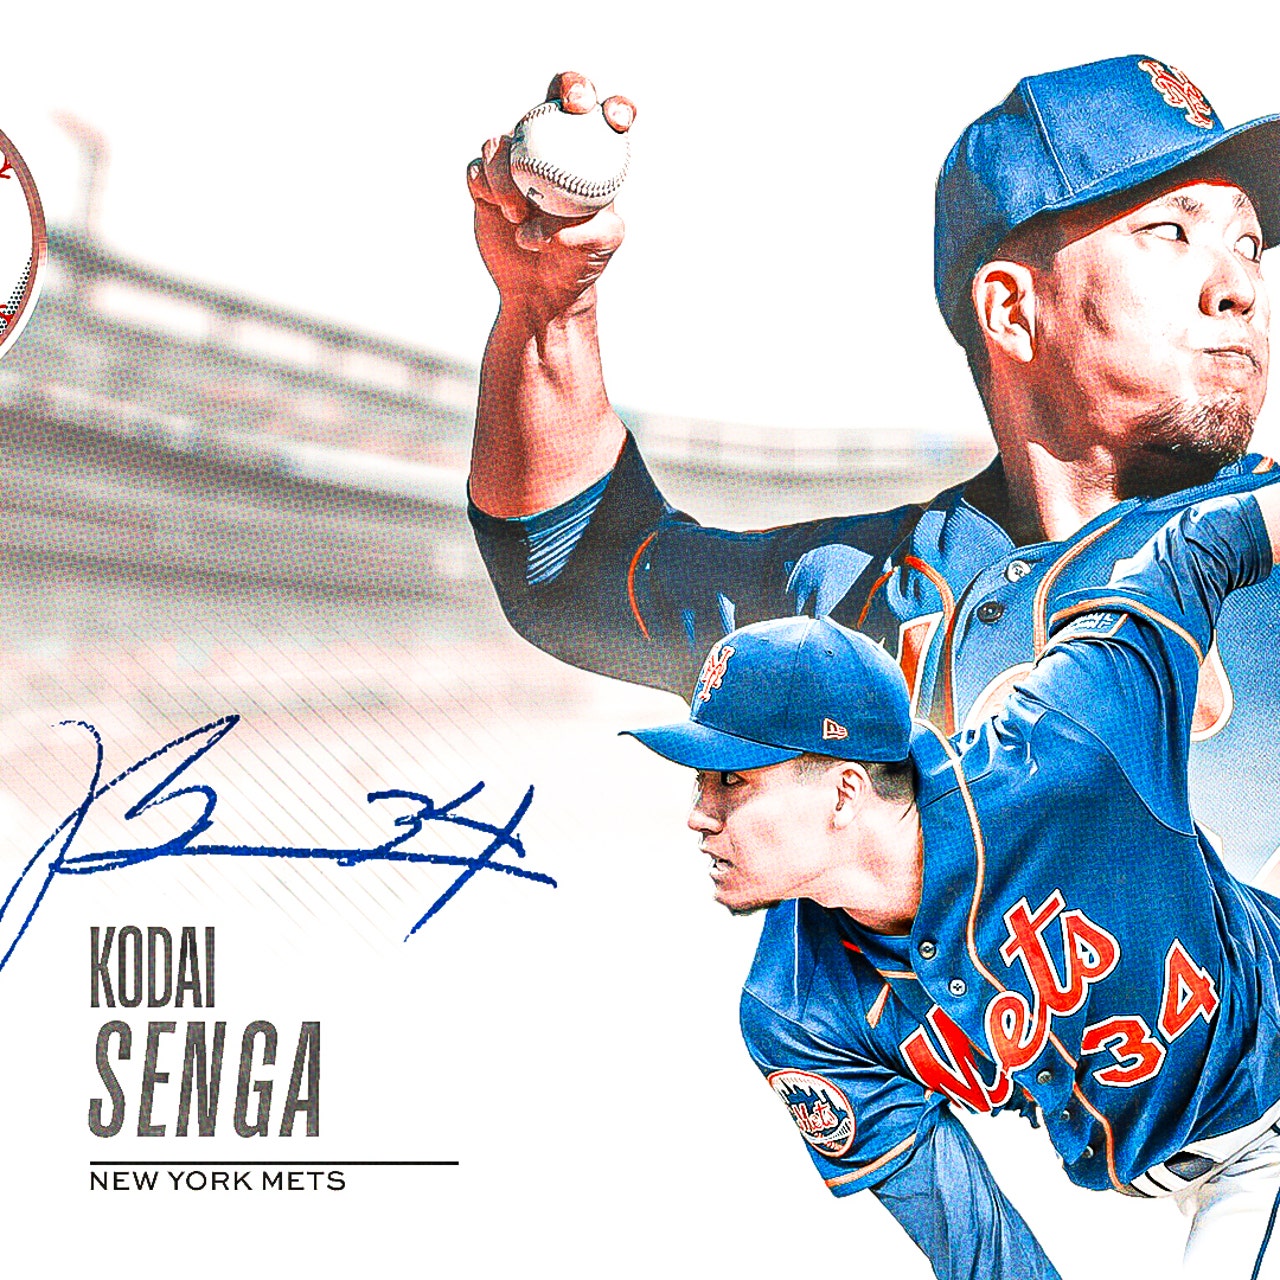 Mets' Kodai Senga making strong case for Cy Young and Rookie of